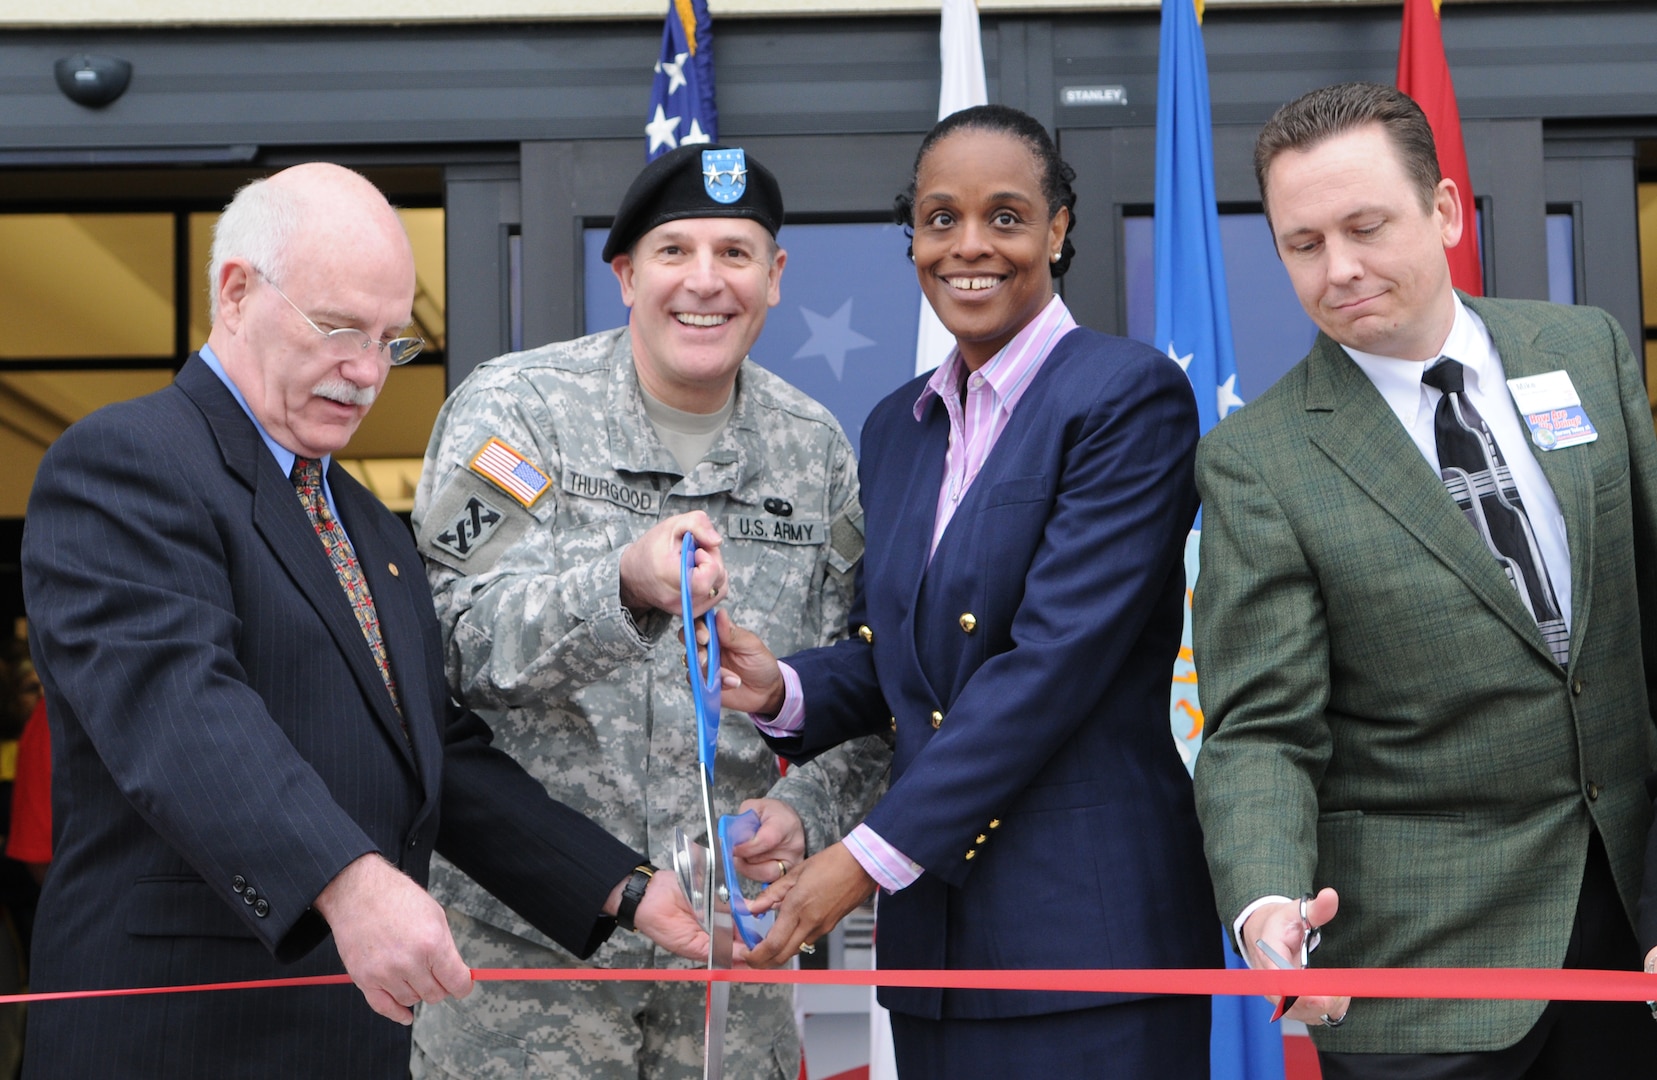 Doors to the new Randolph Air Force Base Exchange opened March 5, with a ribbon cutting ceremony. Event officials cutting the ribbon are (L-R), Robert Graves, Army Maj. Gen. Keith Thurgood, Army and Air Force Exchange Service commander, Shelly Armstrong, and Mike Einer. The new Building is AAFES' first environmentally friendly "green" BX, using energy-effecient glass, lighting, 40 percent recycled material carpet, and HVAC system to reduce the overall operating cost.(U.S. Air Force Photo By Don Lindsey)